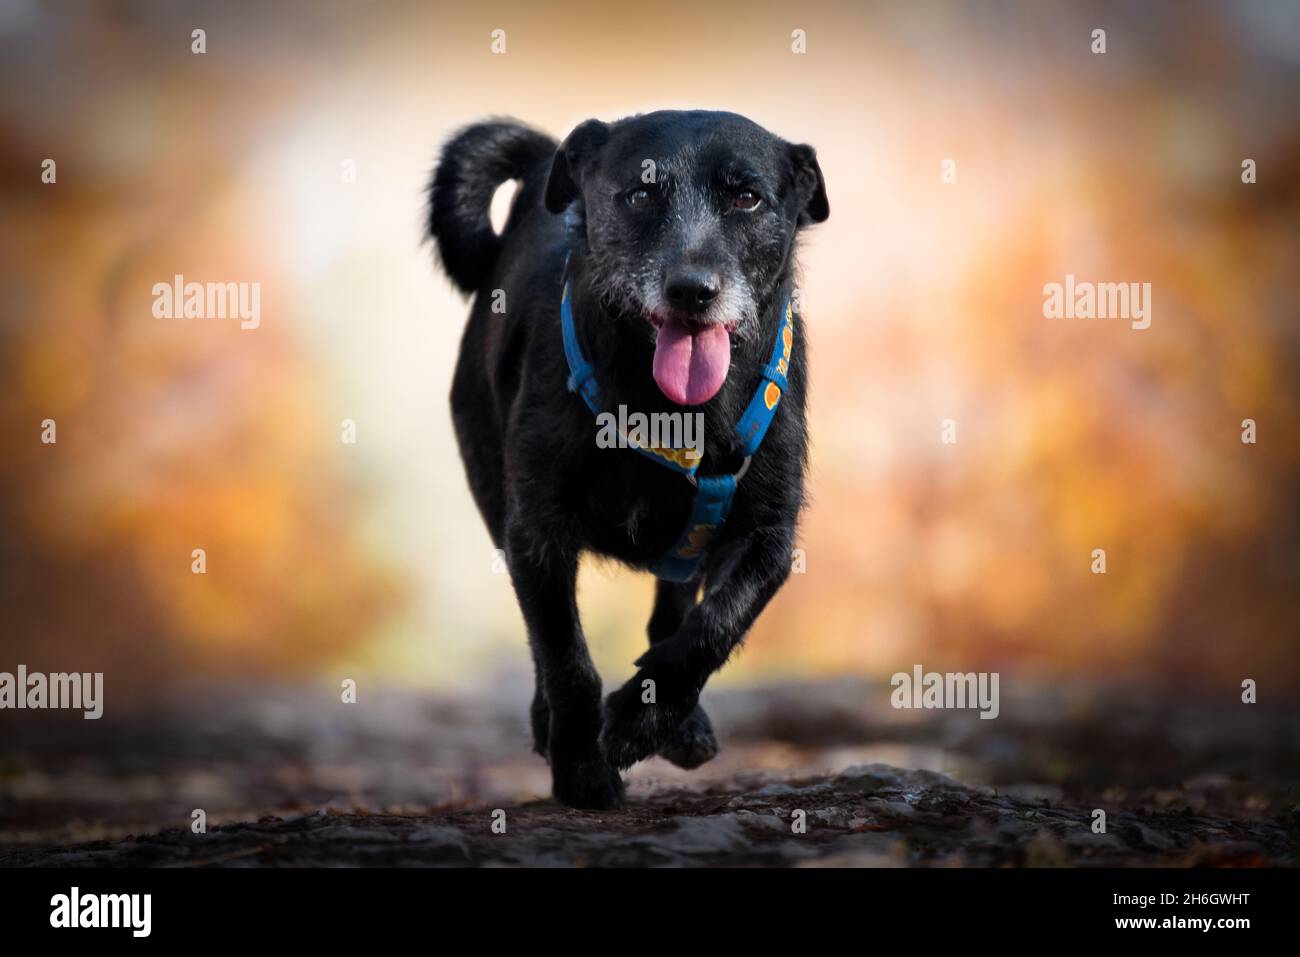 Dog caught playing. A dog is man's best friend. Stock Photo